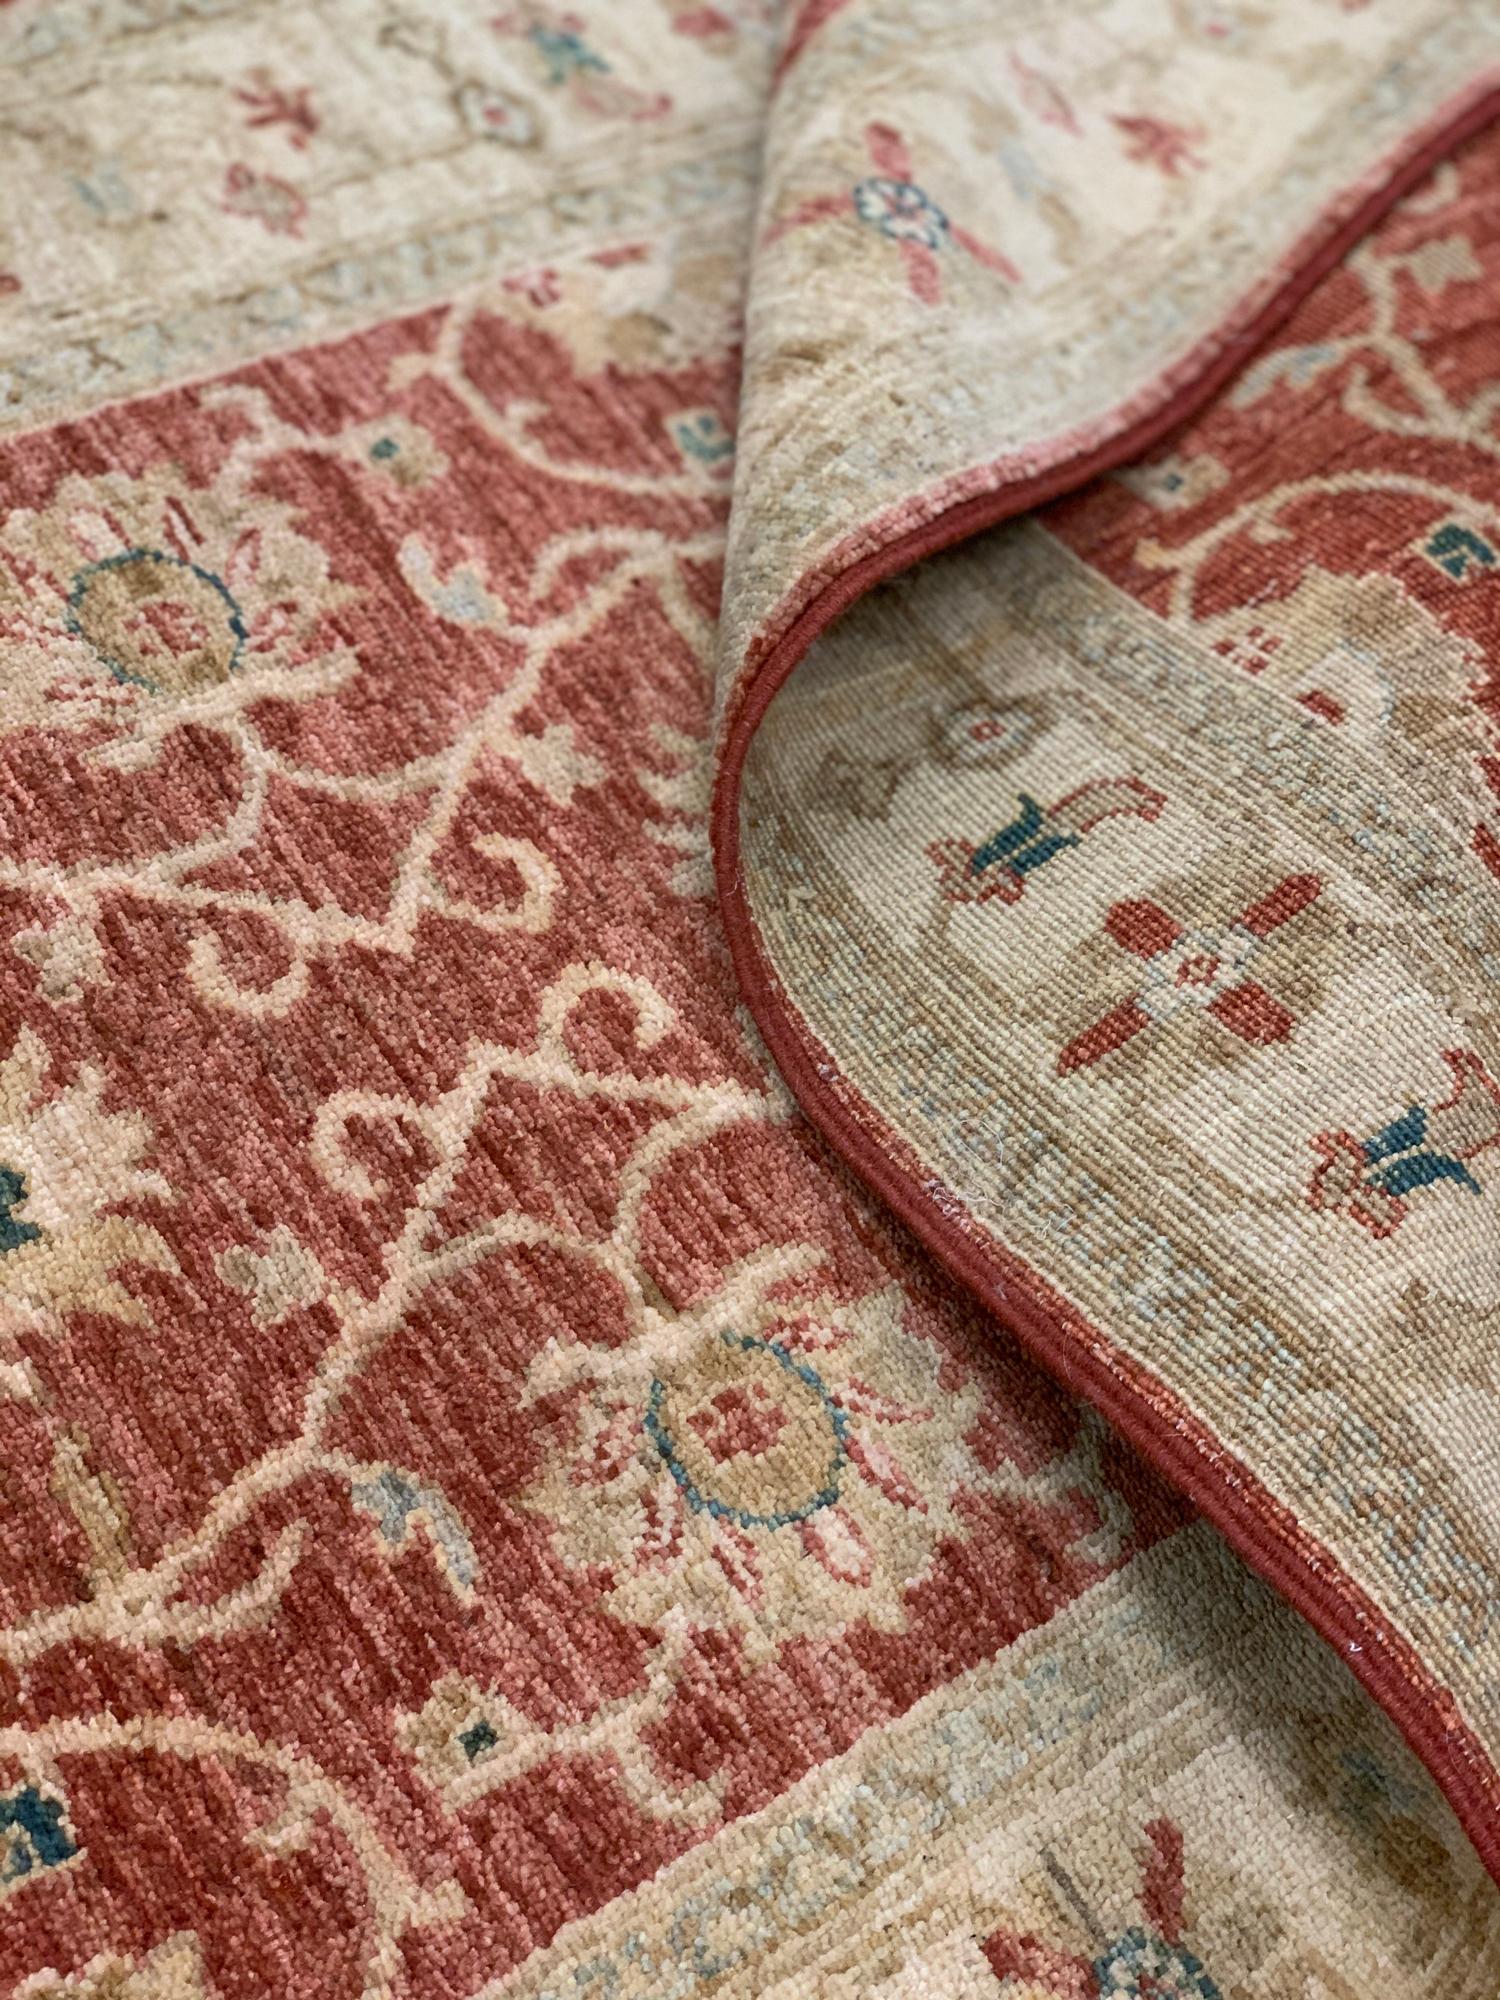 This elegant wool runner rug is a Ziegler runner rug. Woven by hand in the early 21st century, circa 2010. The design features floral patterns traditionally seen in Ziegler carpets and rugs. The rustic colour palette and classic design featured in